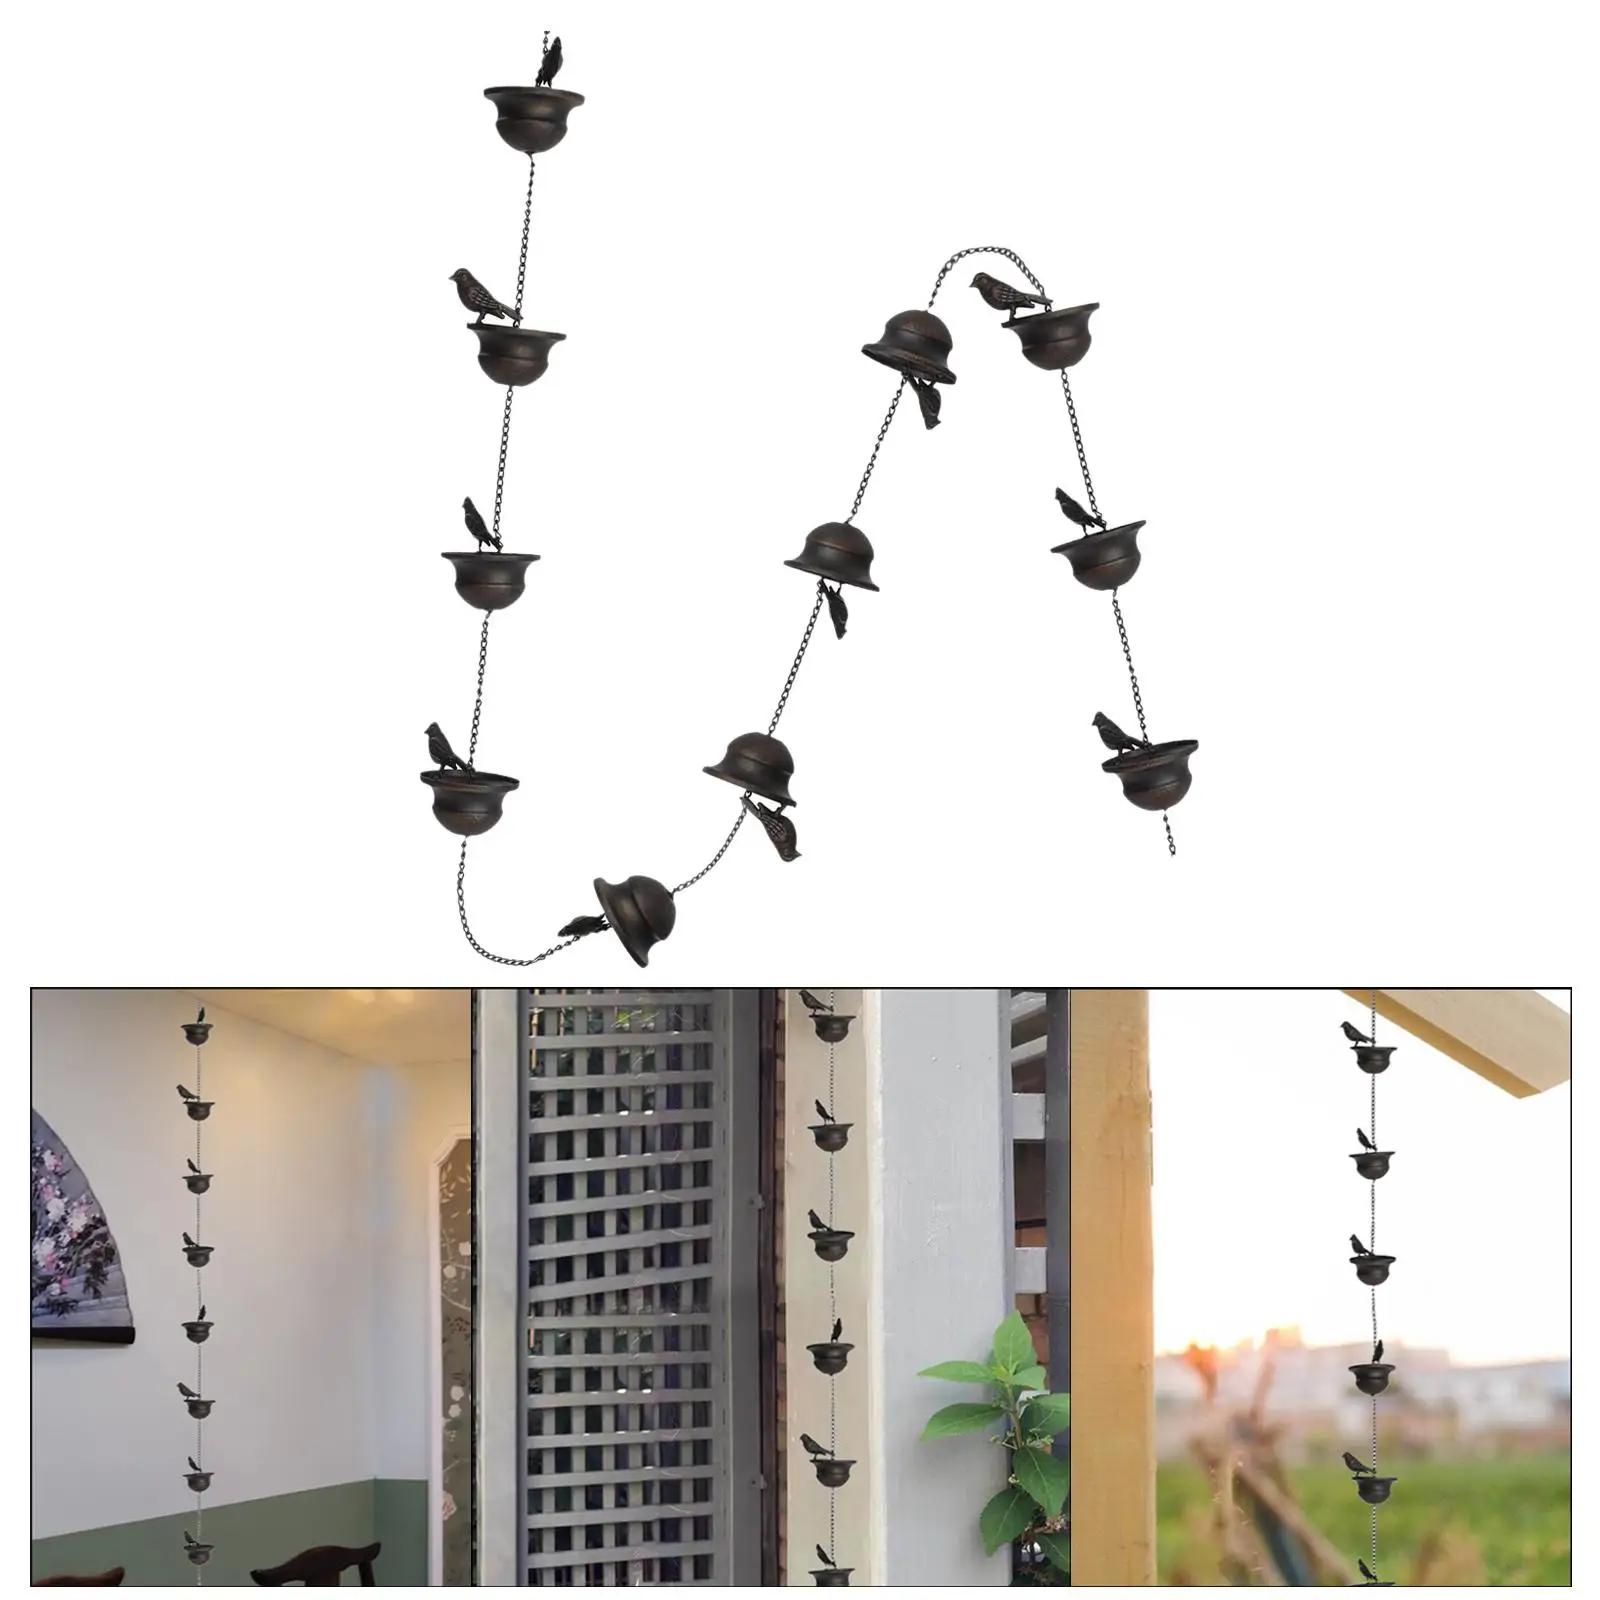 Bird Rain Chains for Gutters Replacement Downspouts Decorative Rainwater Catcher Chains 240cm for Gazebos Garden Home Outdoor